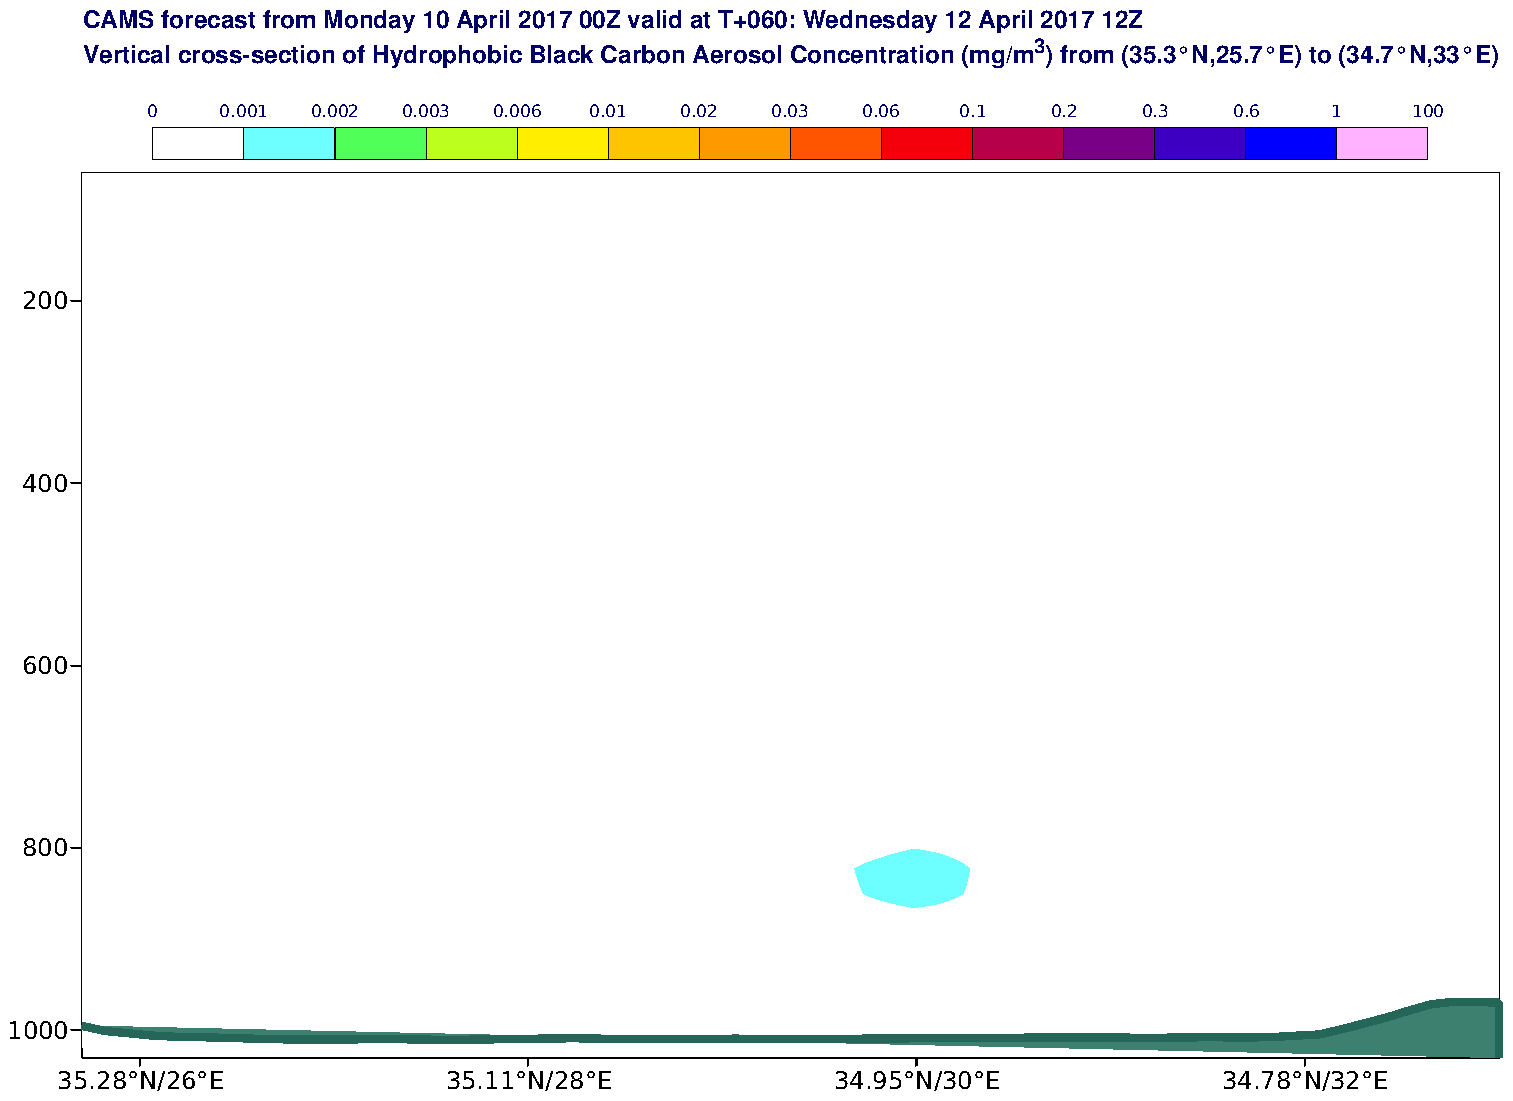 Vertical cross-section of Hydrophobic Black Carbon Aerosol Concentration (mg/m3) valid at T60 - 2017-04-12 12:00